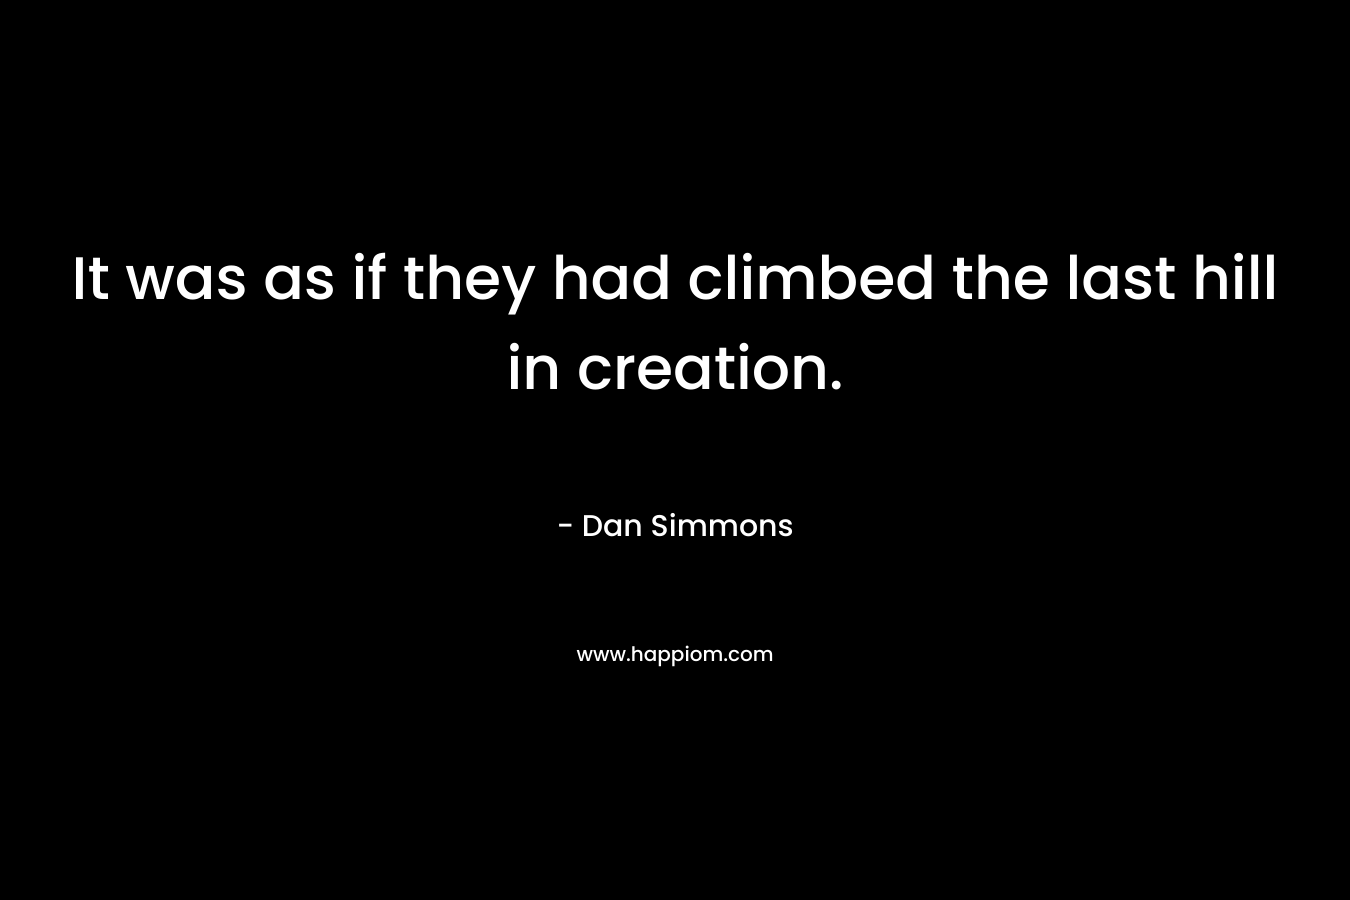 It was as if they had climbed the last hill in creation.